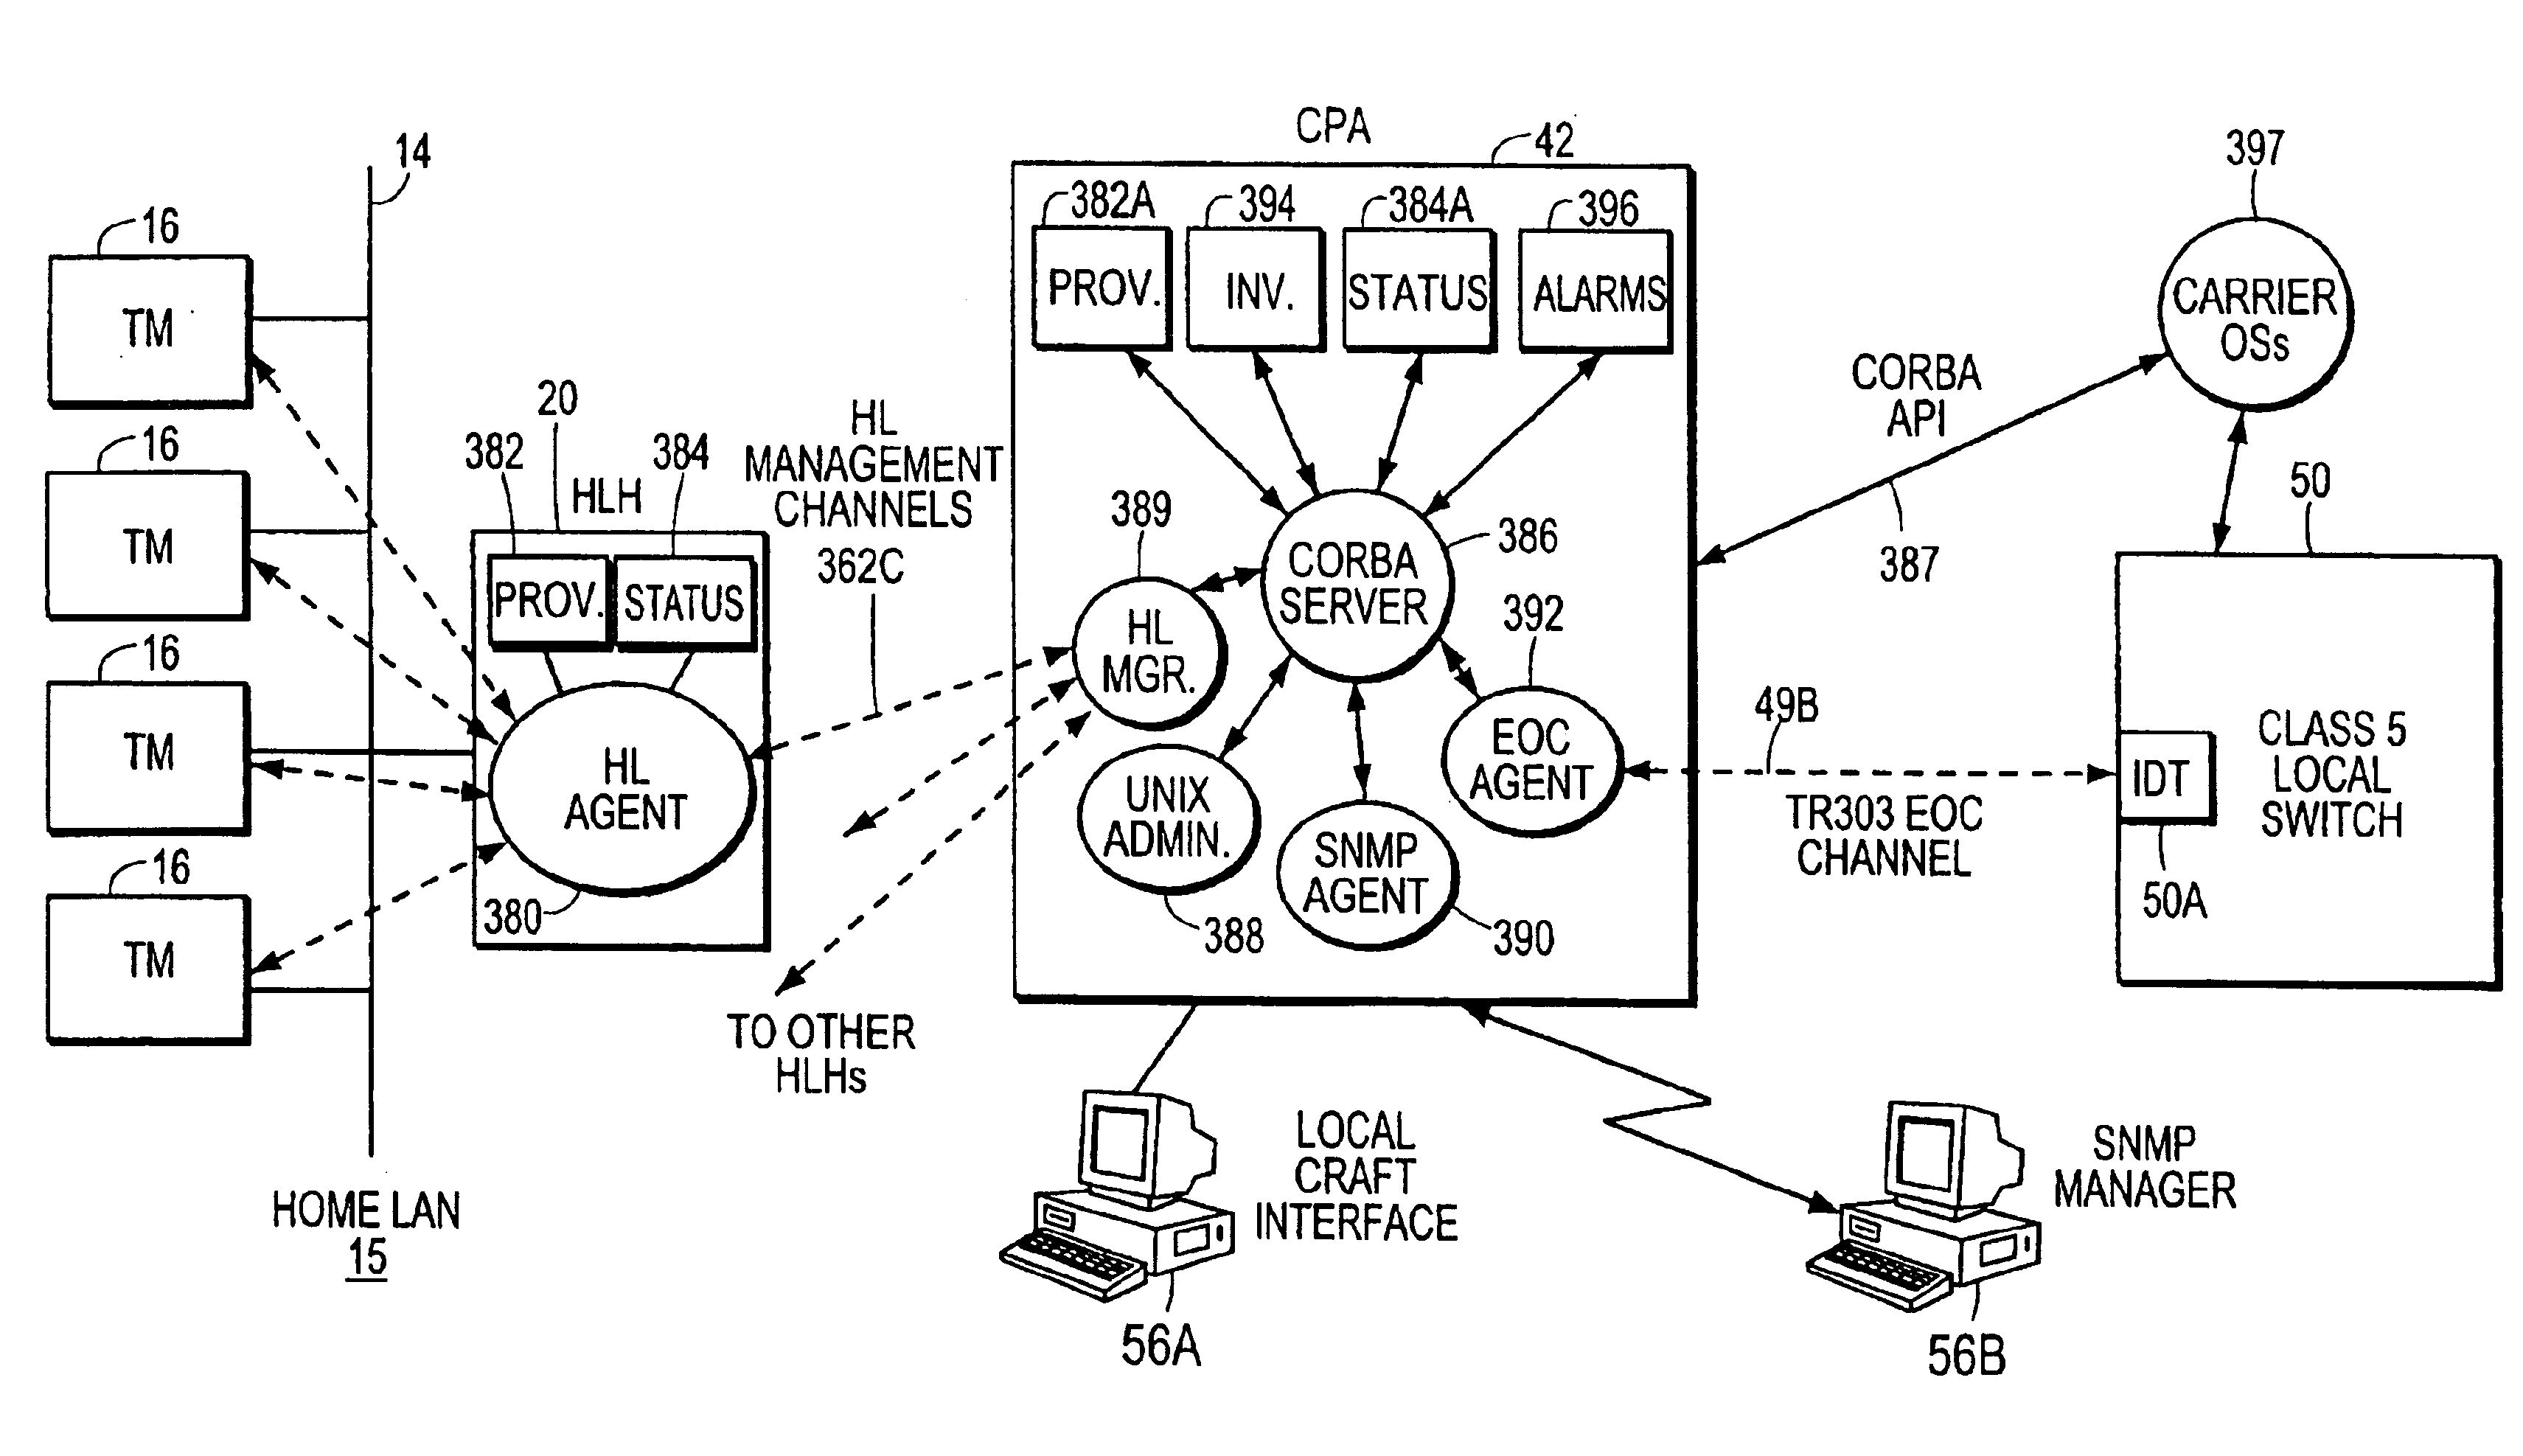 Virtual loop carrier system with cobra interface for gateway control